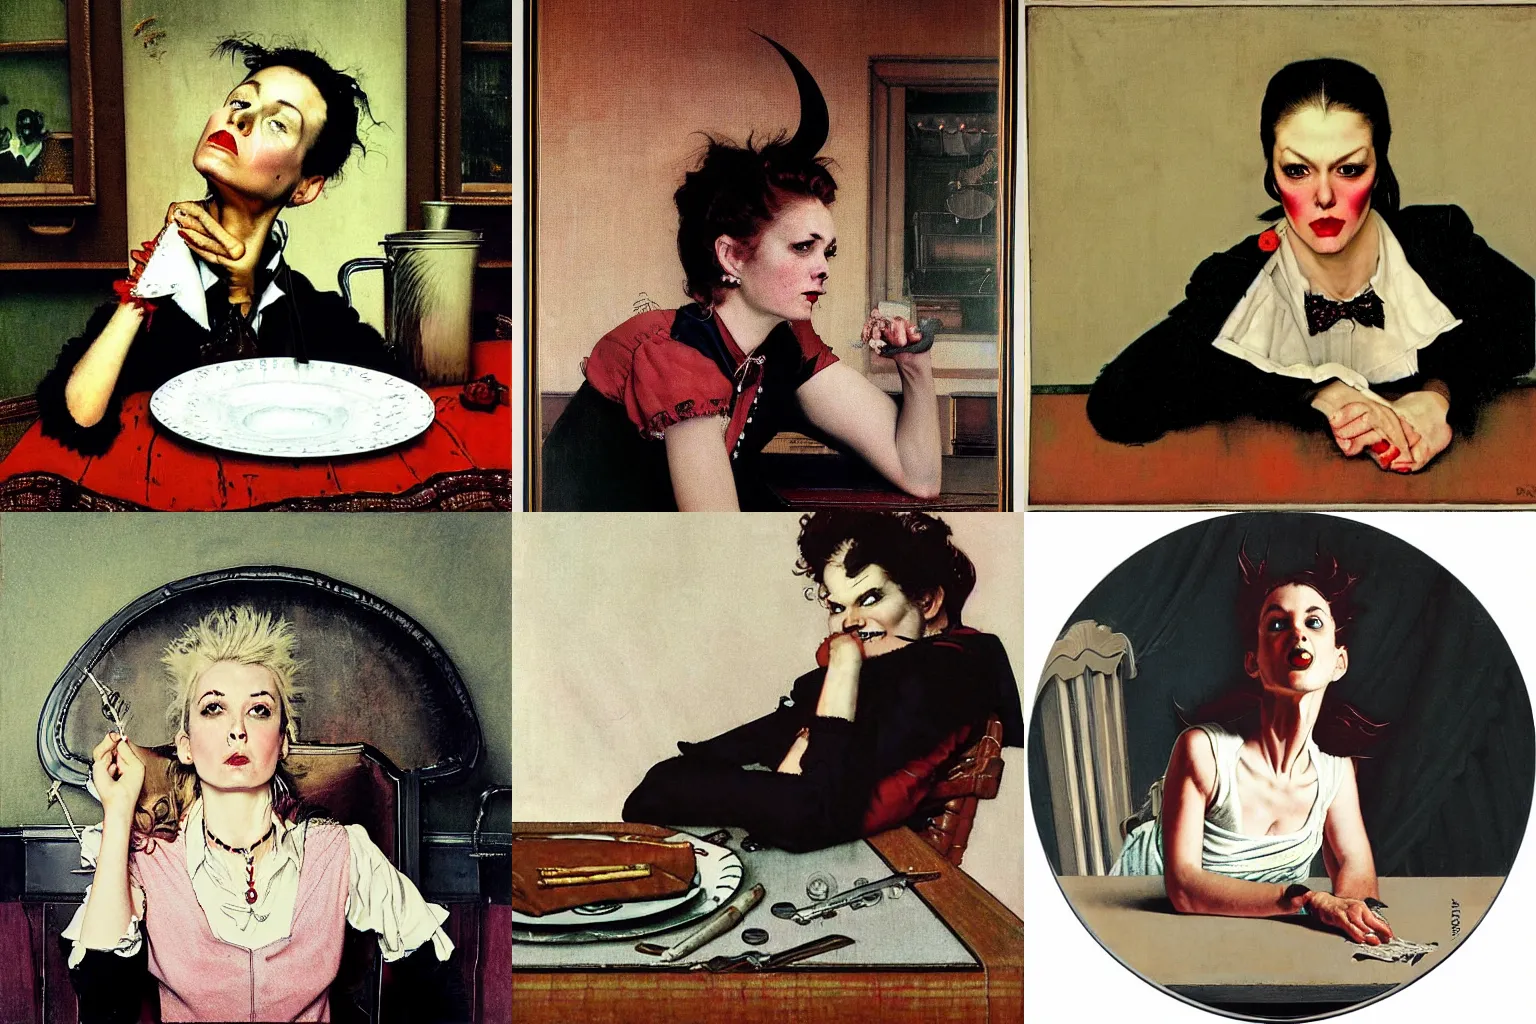 Prompt: Portrait of an irritated punk vampire woman, posed on a table and looking up, by Norman Rockwell.